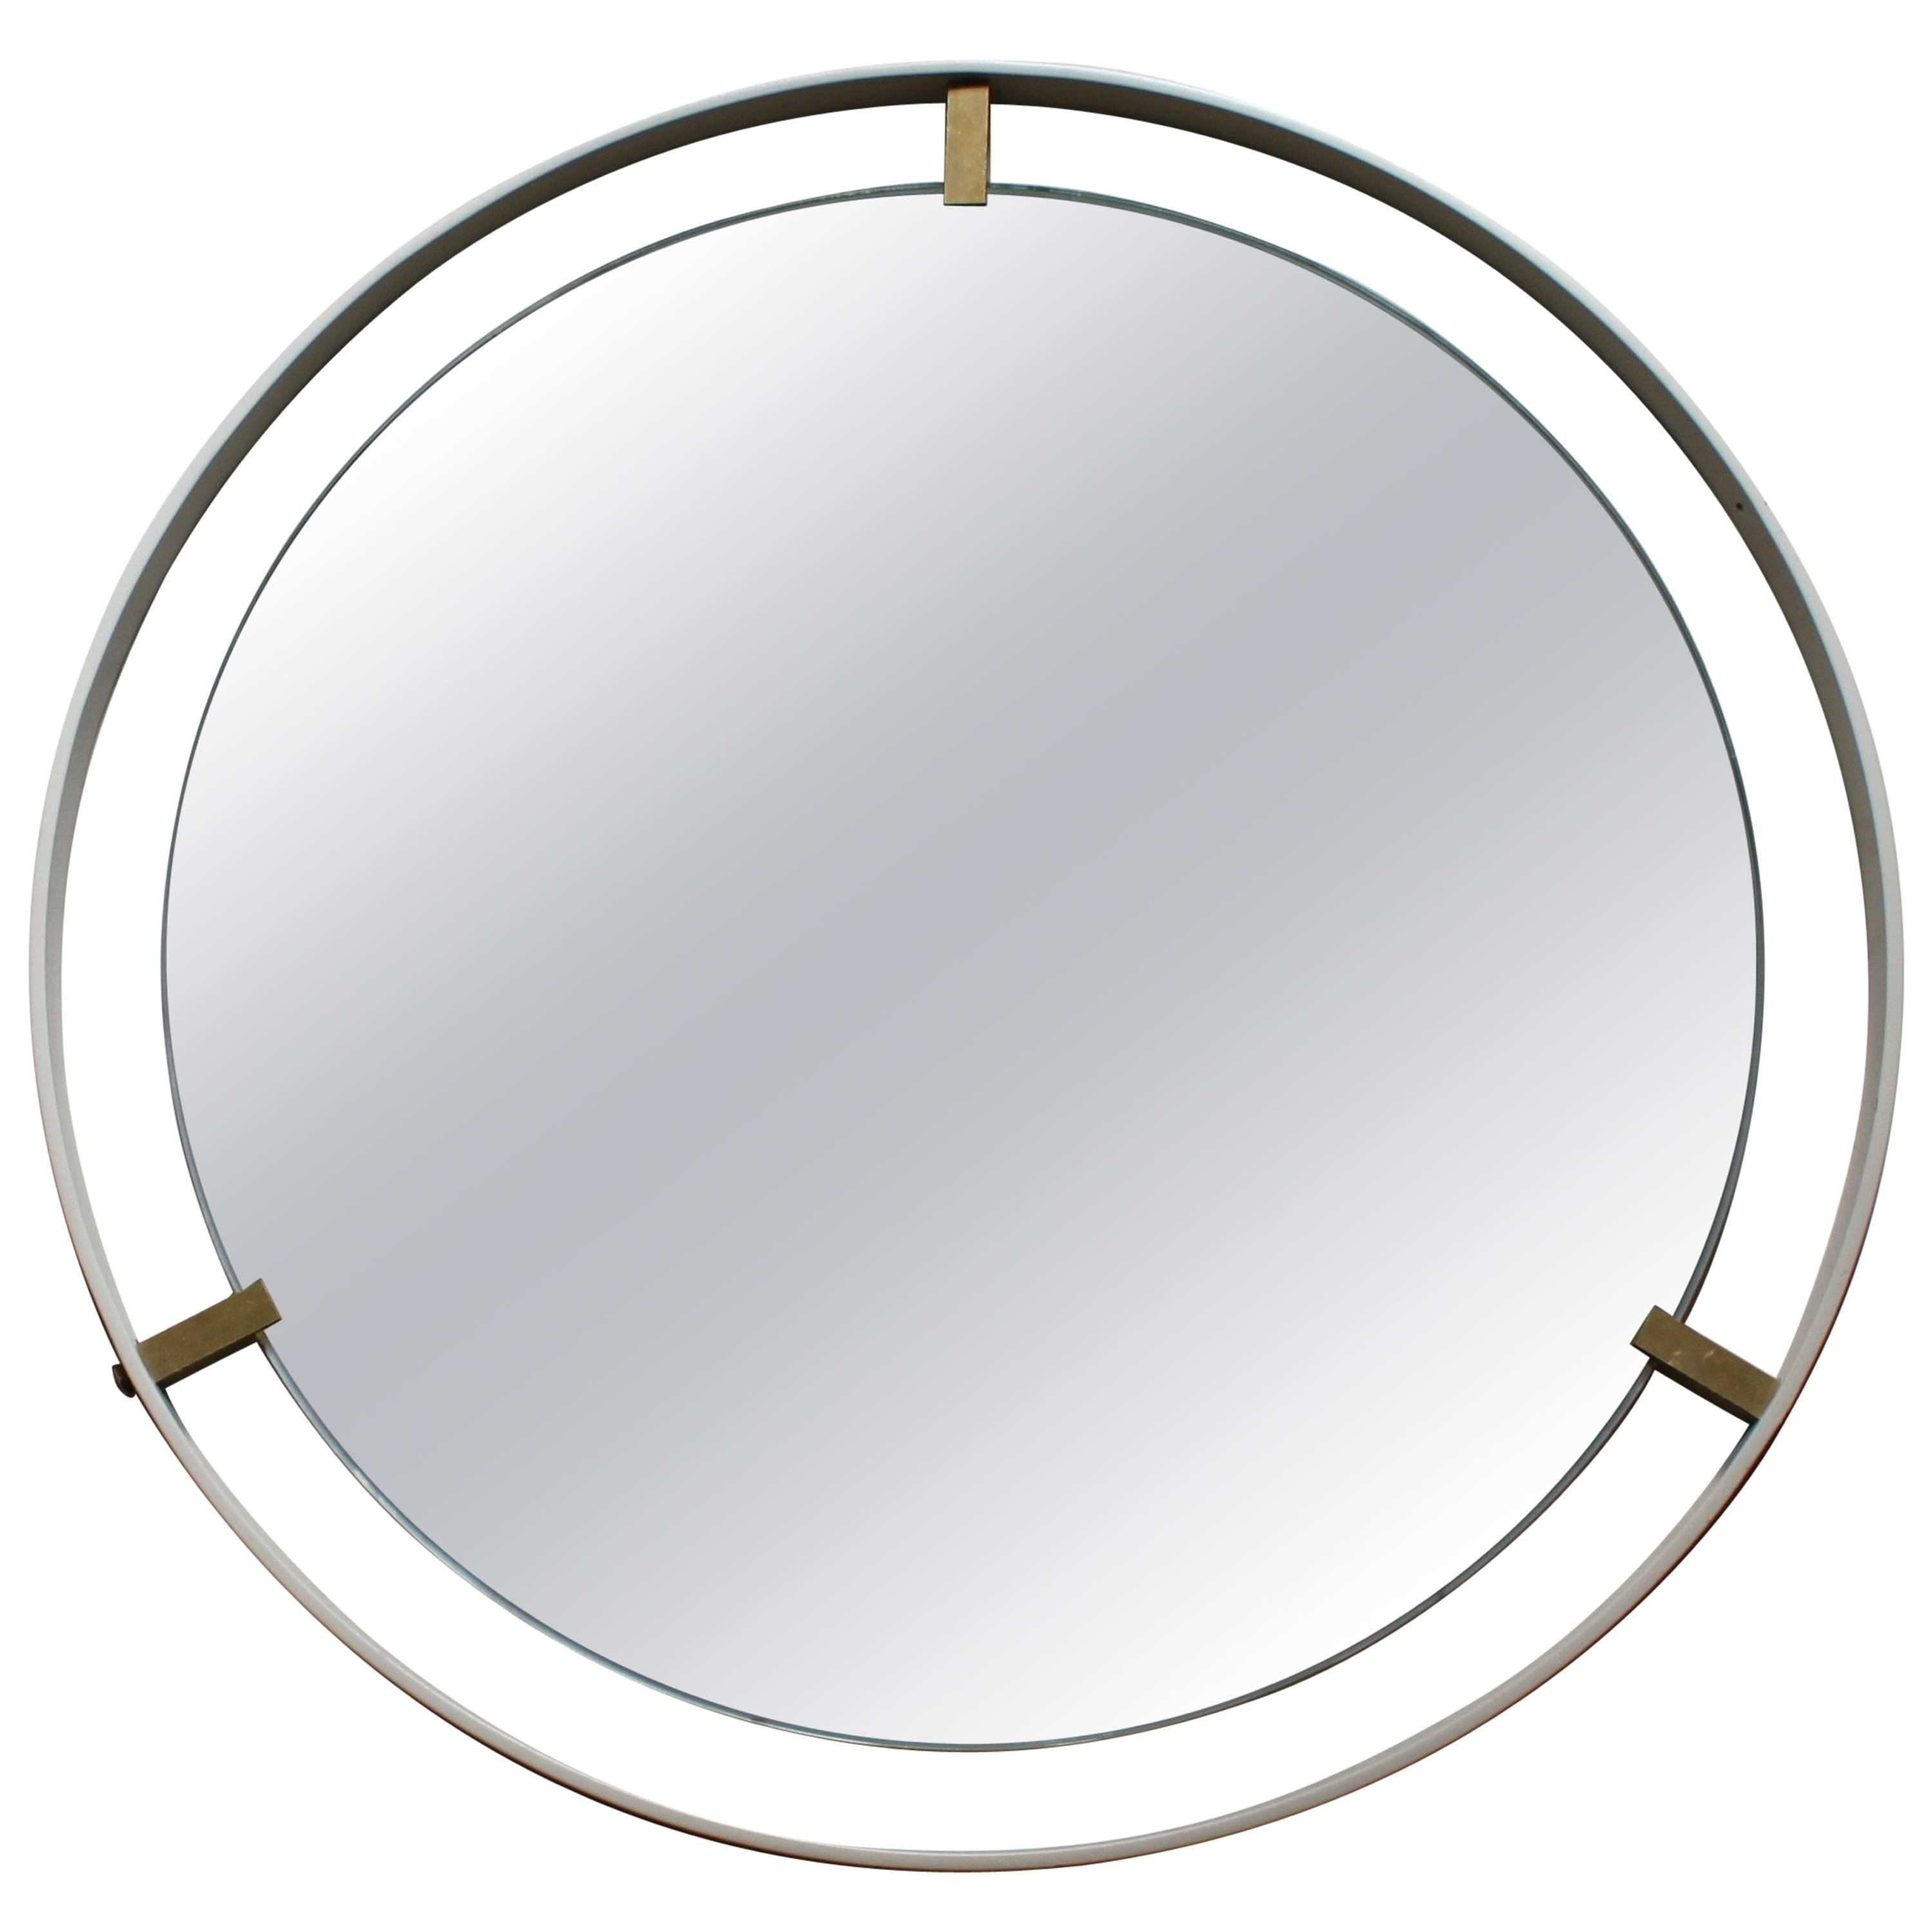 Enameled Metal and Brass Mirror, Italian, 1950s For Sale